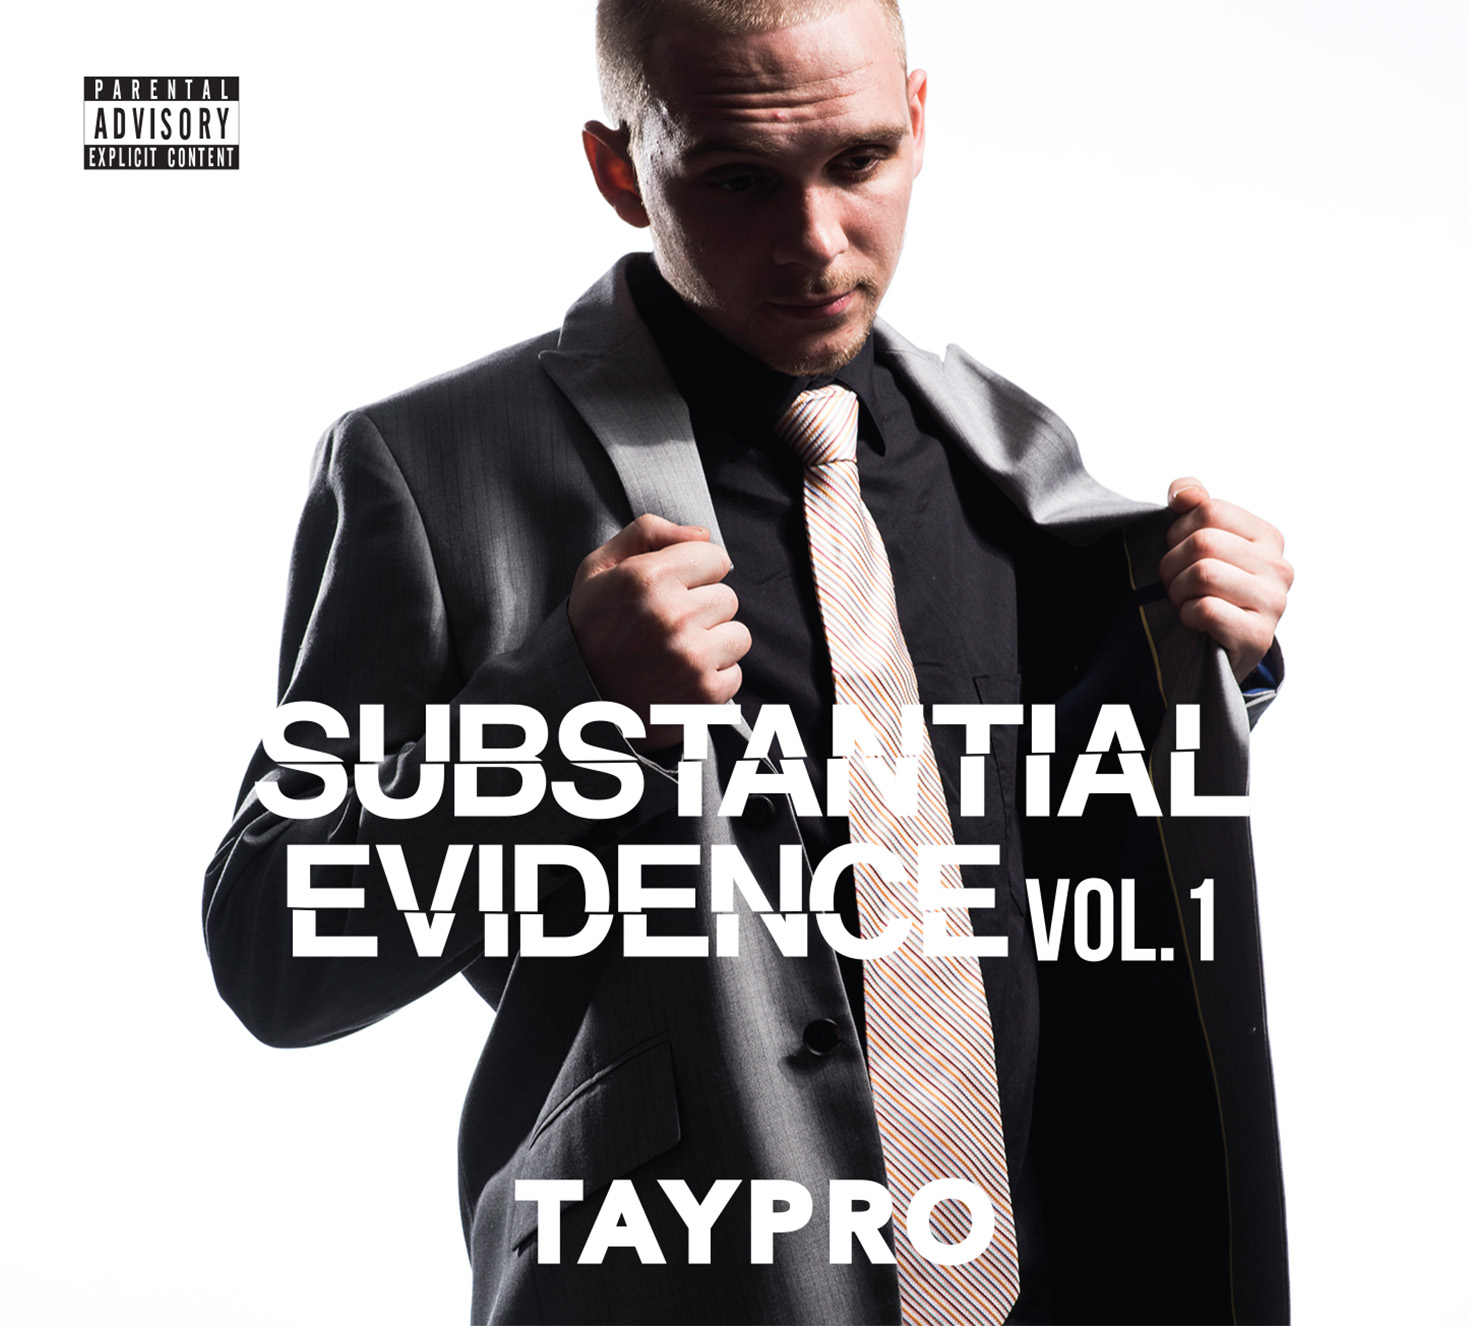 Tay Pro – Substantial Evidence Volume 1